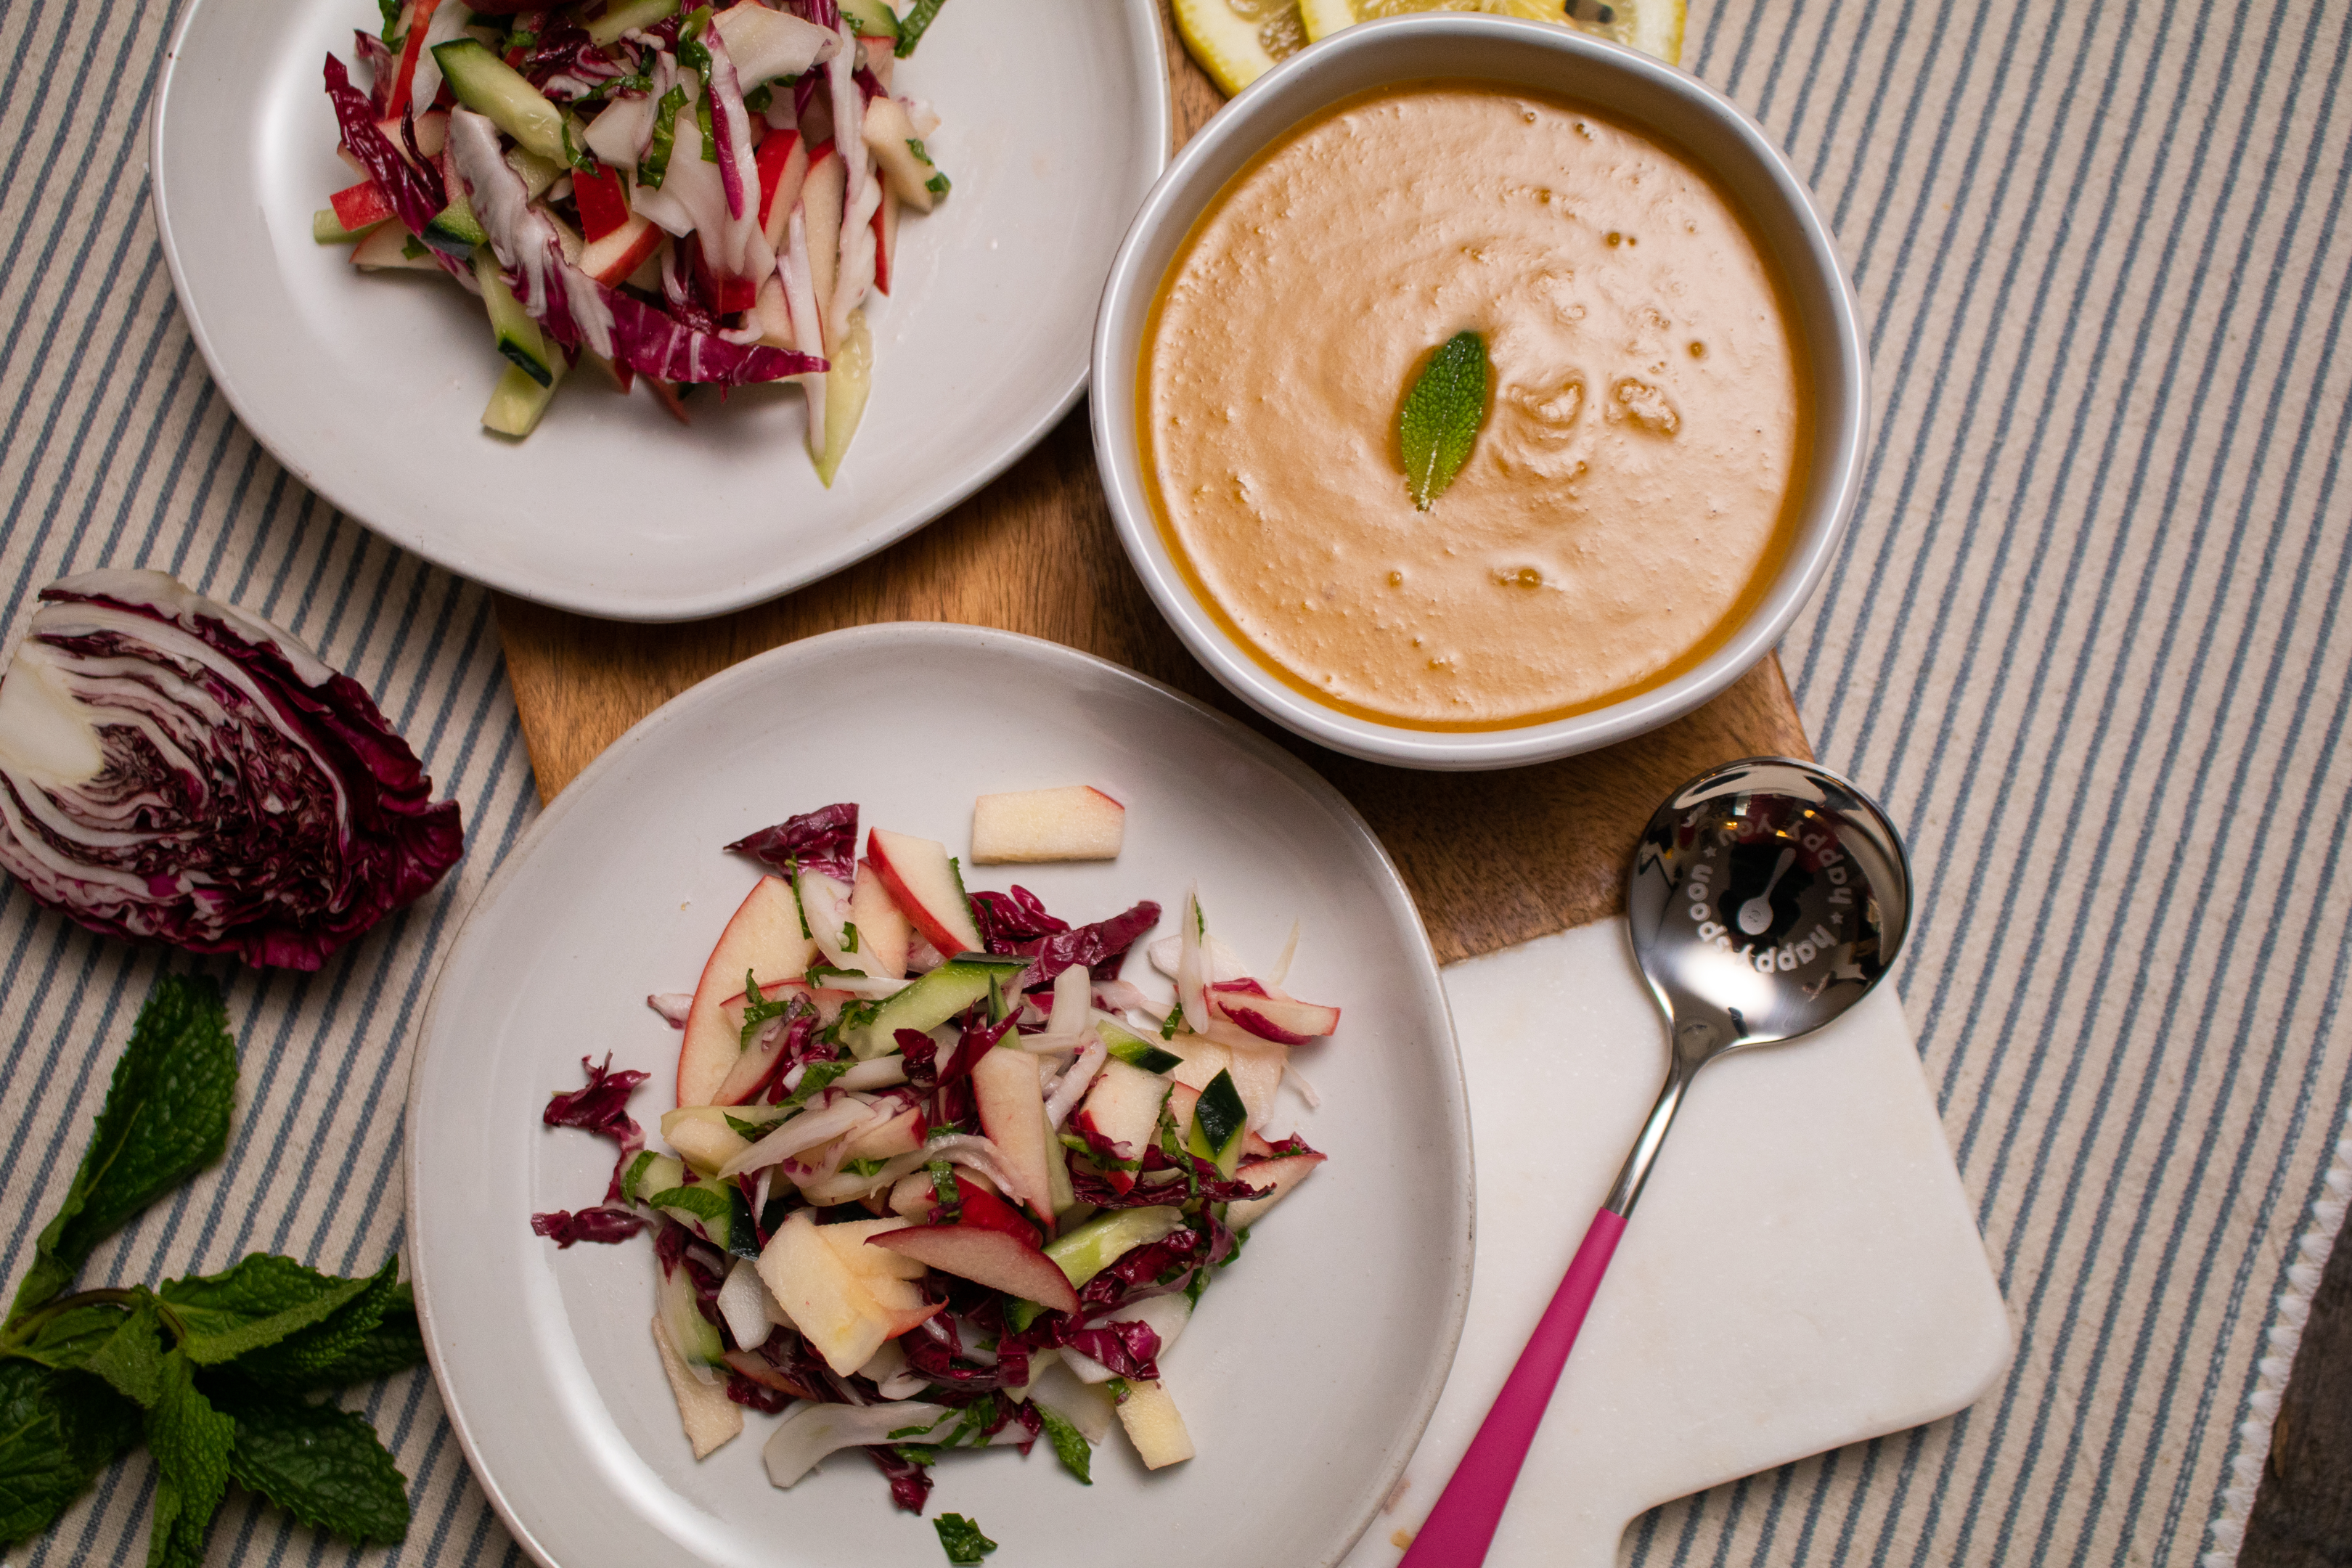 An energizing salad with apples, cabbage, cucumbers, and a bowl of Proper Good Spiced Pumpkin Soup